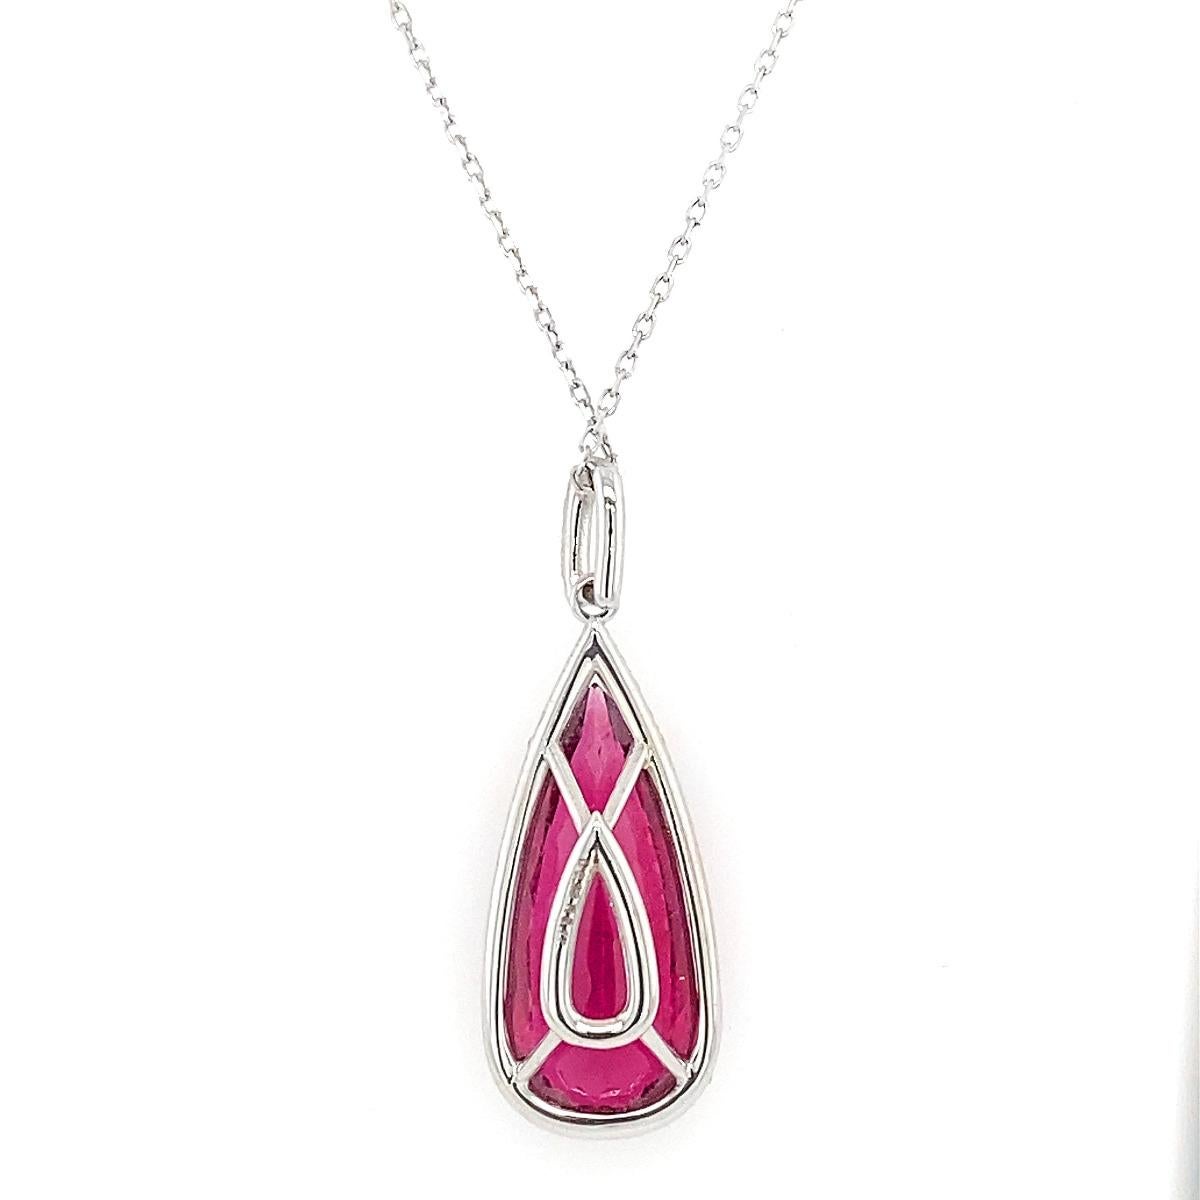 Natural Rubellite 5.03 carats set in 14K White Gold Pendant with 0.29 carats Diamonds

Details
SKU
3999
Metal type
14K White Gold
Metal Weight
1.76 gr
Center Stone
Rubellite
Side Stones
Diamonds
Report
N/A

Center Stone
Quantity
1
Total Weight
5.03